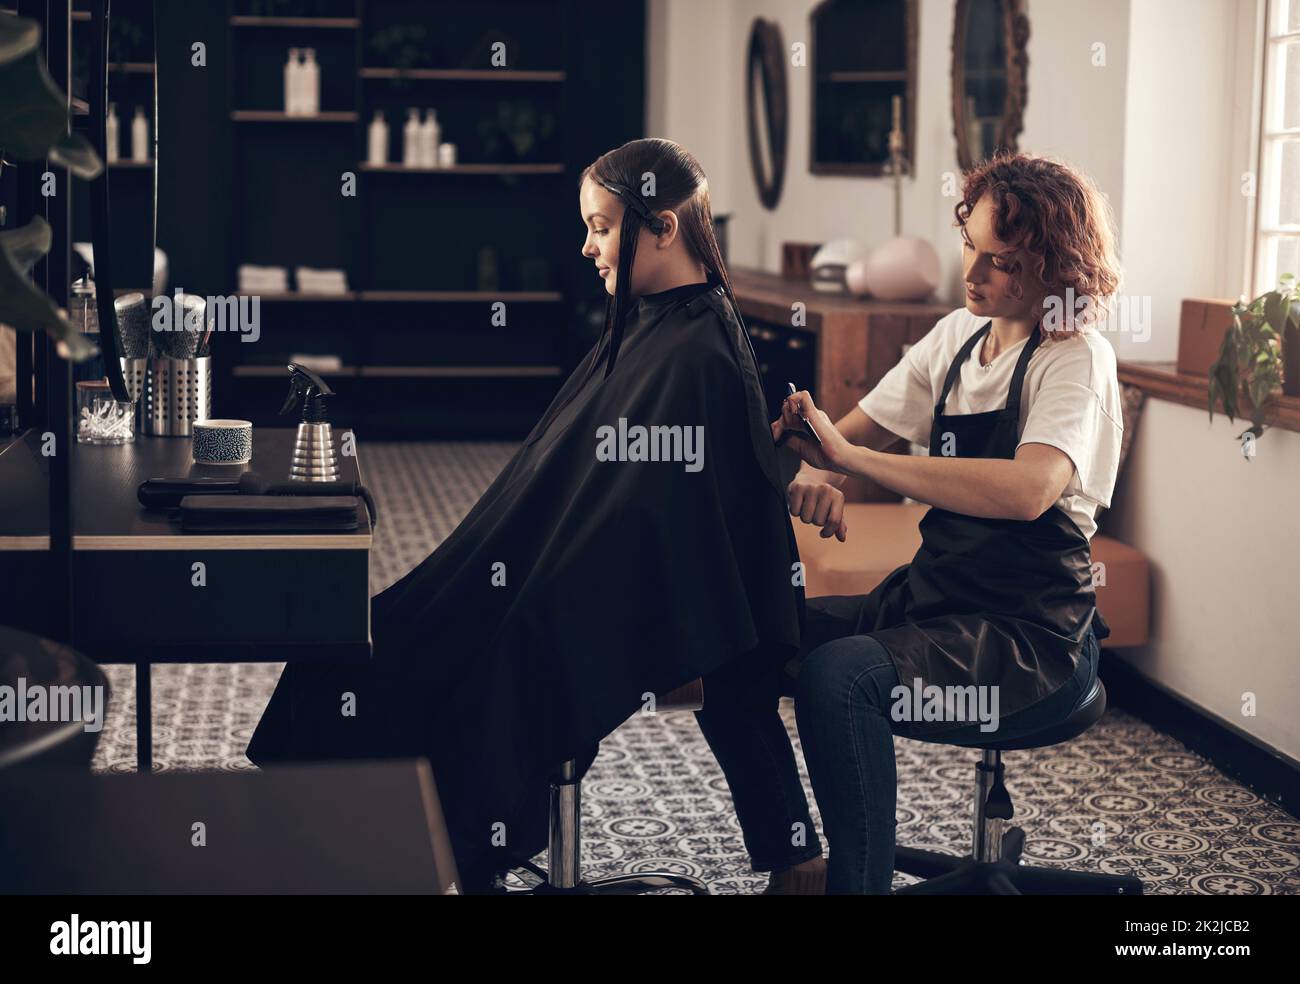 She always do a good job with my hair. Shot of a hairstylist cutting a clients hair in a salon. Stock Photo